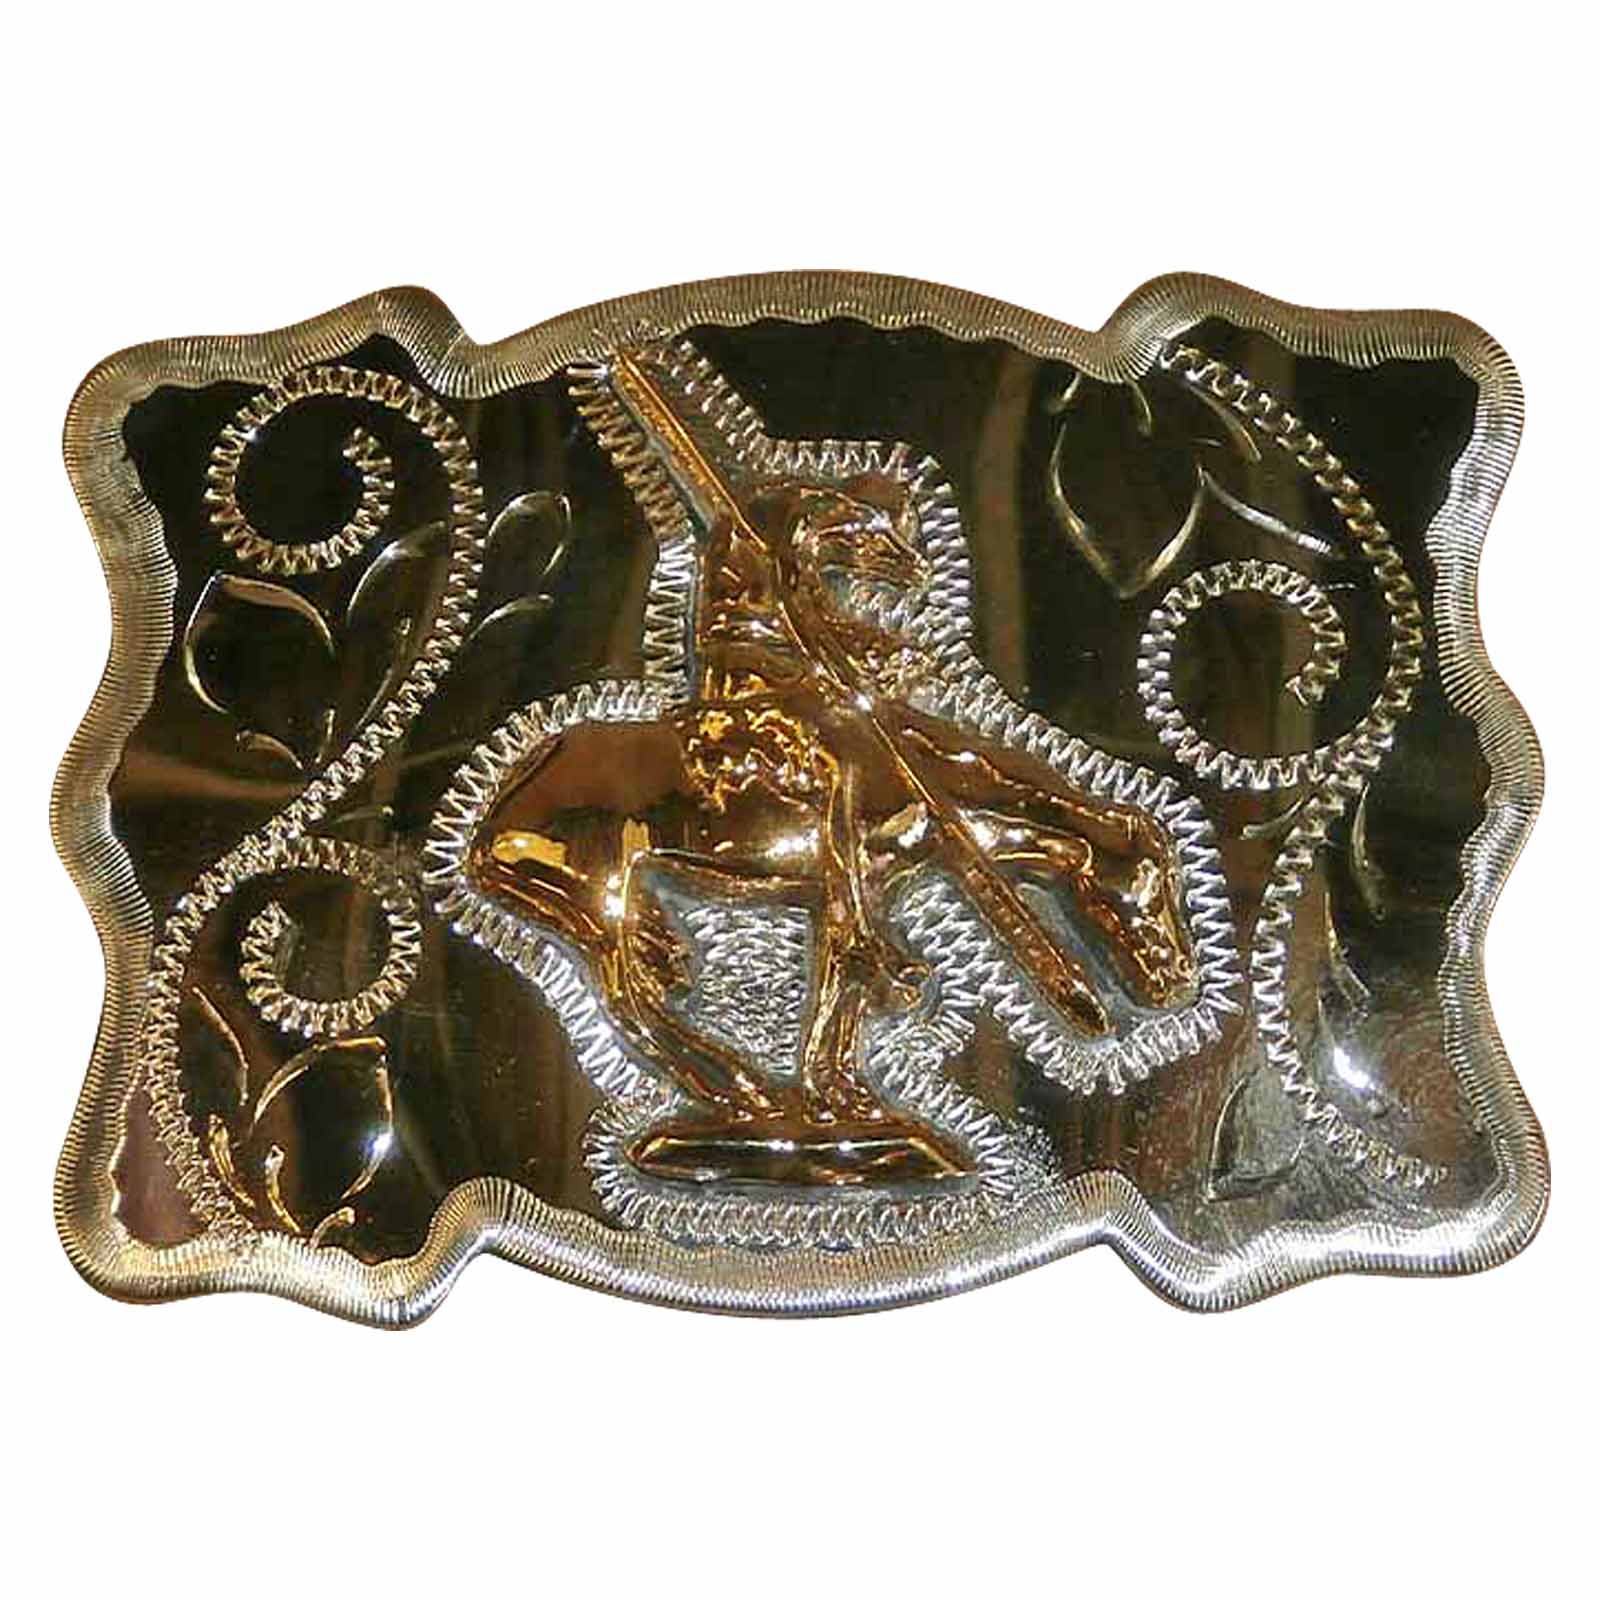 End of The Trail Western Belt Buckle